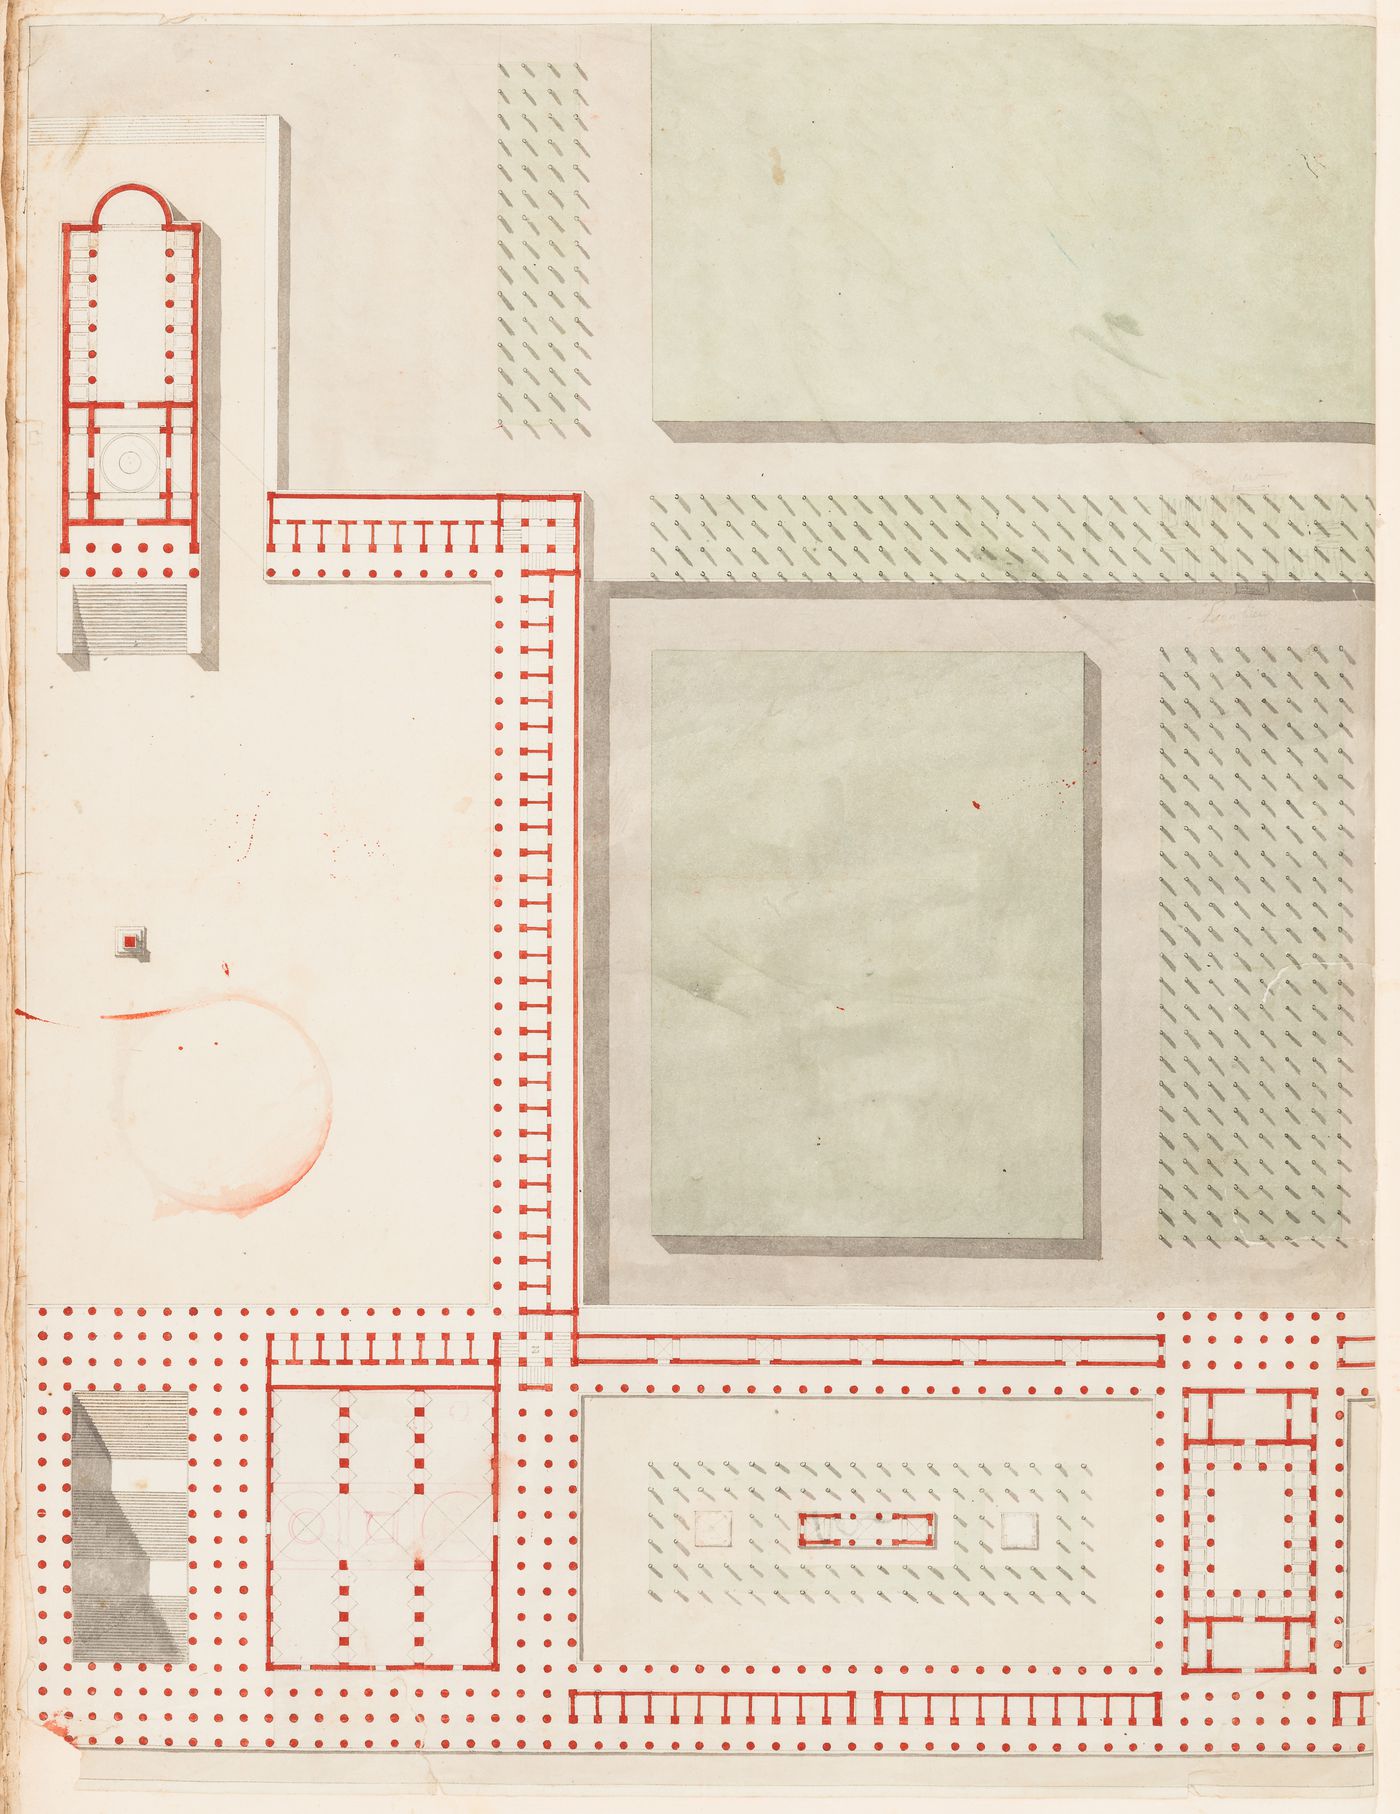 1802 Grand Prix Competition: Elevation and a partial plan for a public fair located on the banks of a large river; 1802 Concours d'essai: Elevation, plan and section for an unidentified building